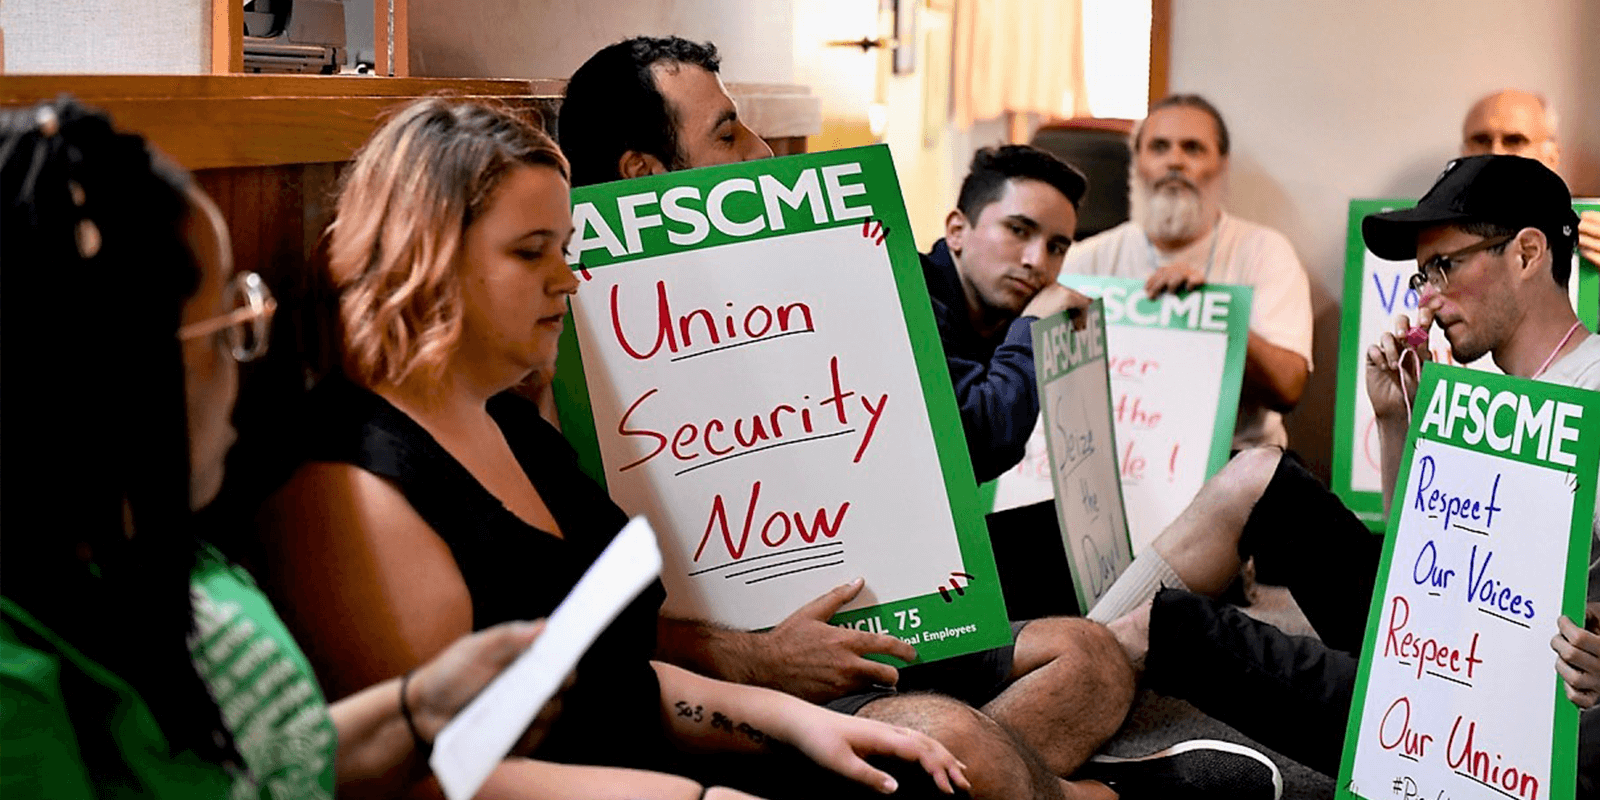 AFSCME Oregon Executive Director Gets Arrested in Solidarity with Bargaining Workers